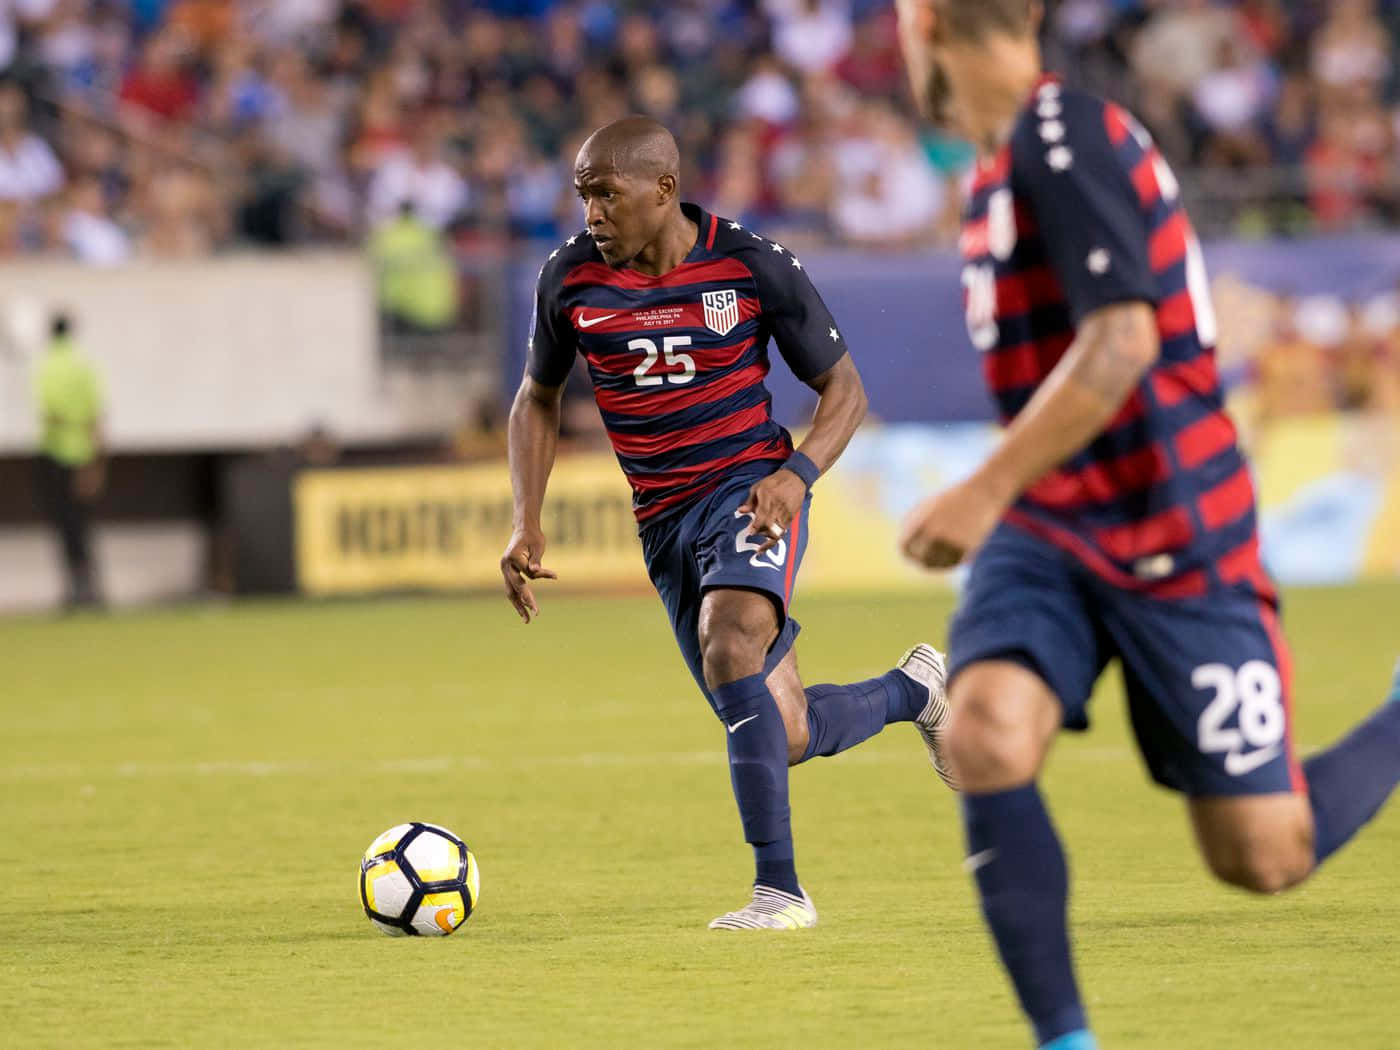 Darlington Nagbe in action during a CONCACAF match Wallpaper